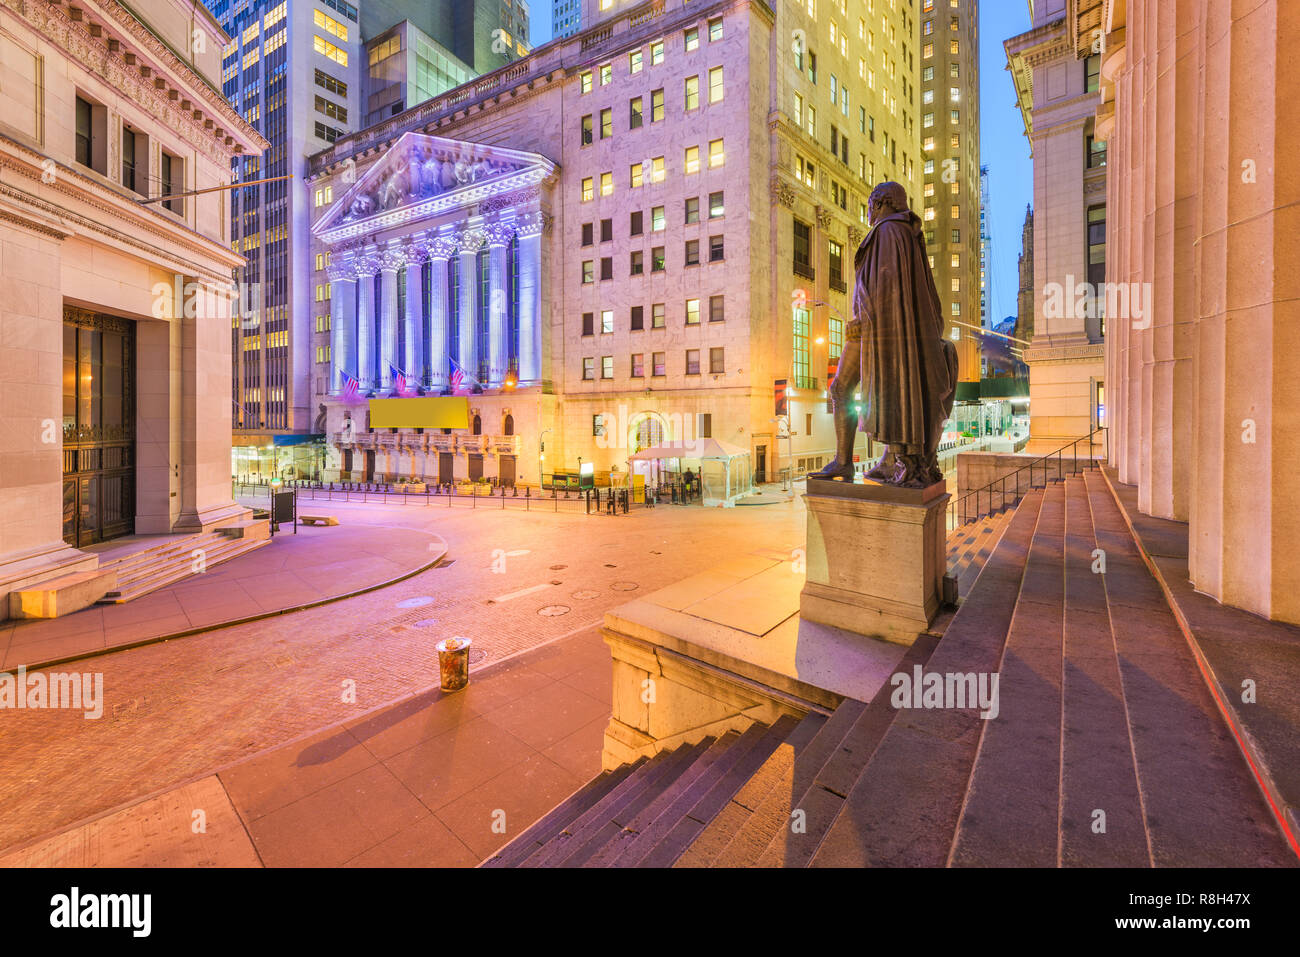 New York City in the Financial District on Wall Street at night. Stock Photo